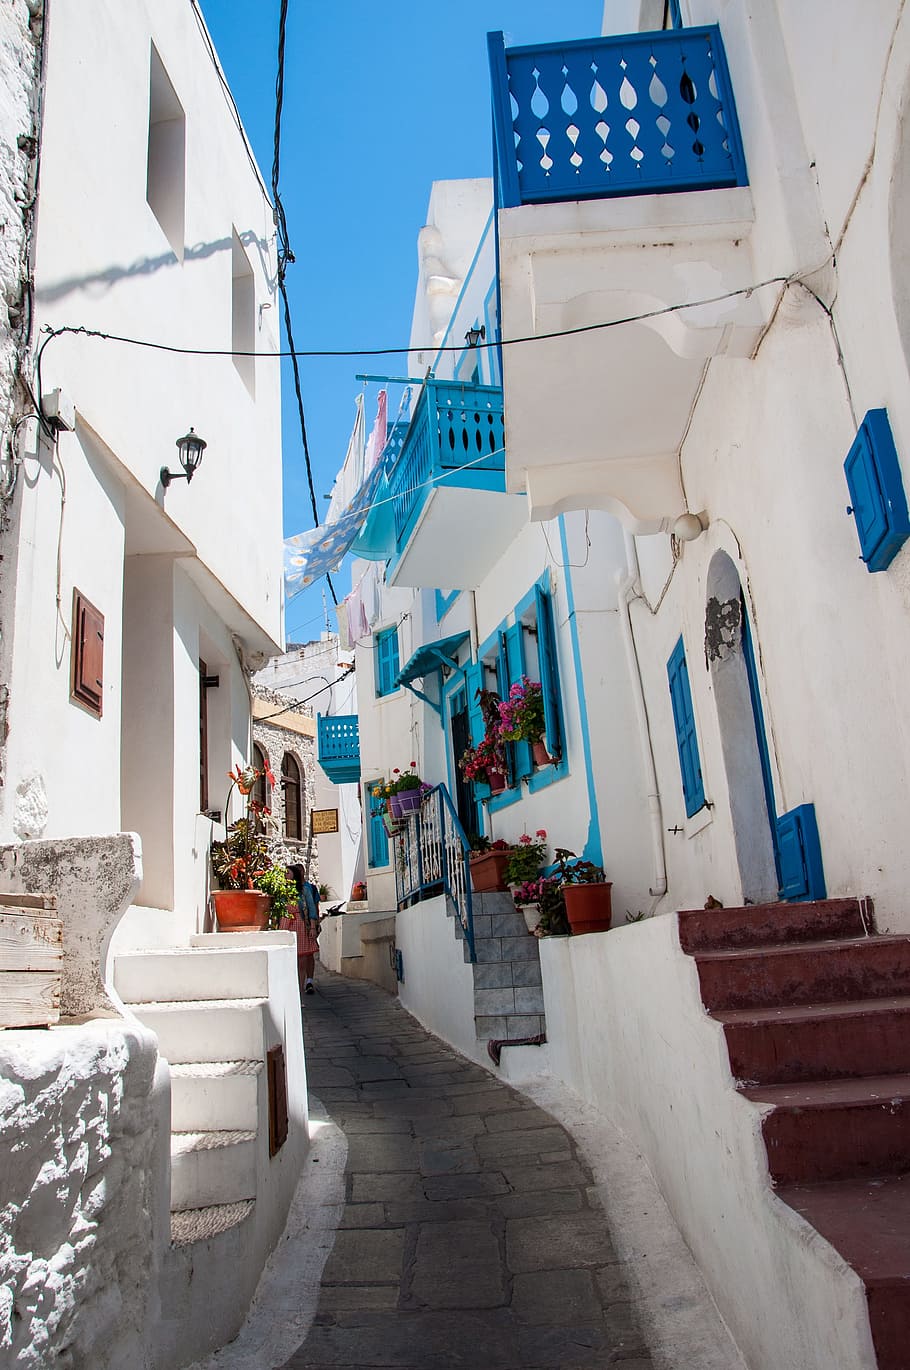 Holiday, Greece, Aegean Sea, White, blue, traditional greek, white houses, architecture, homes, tourism